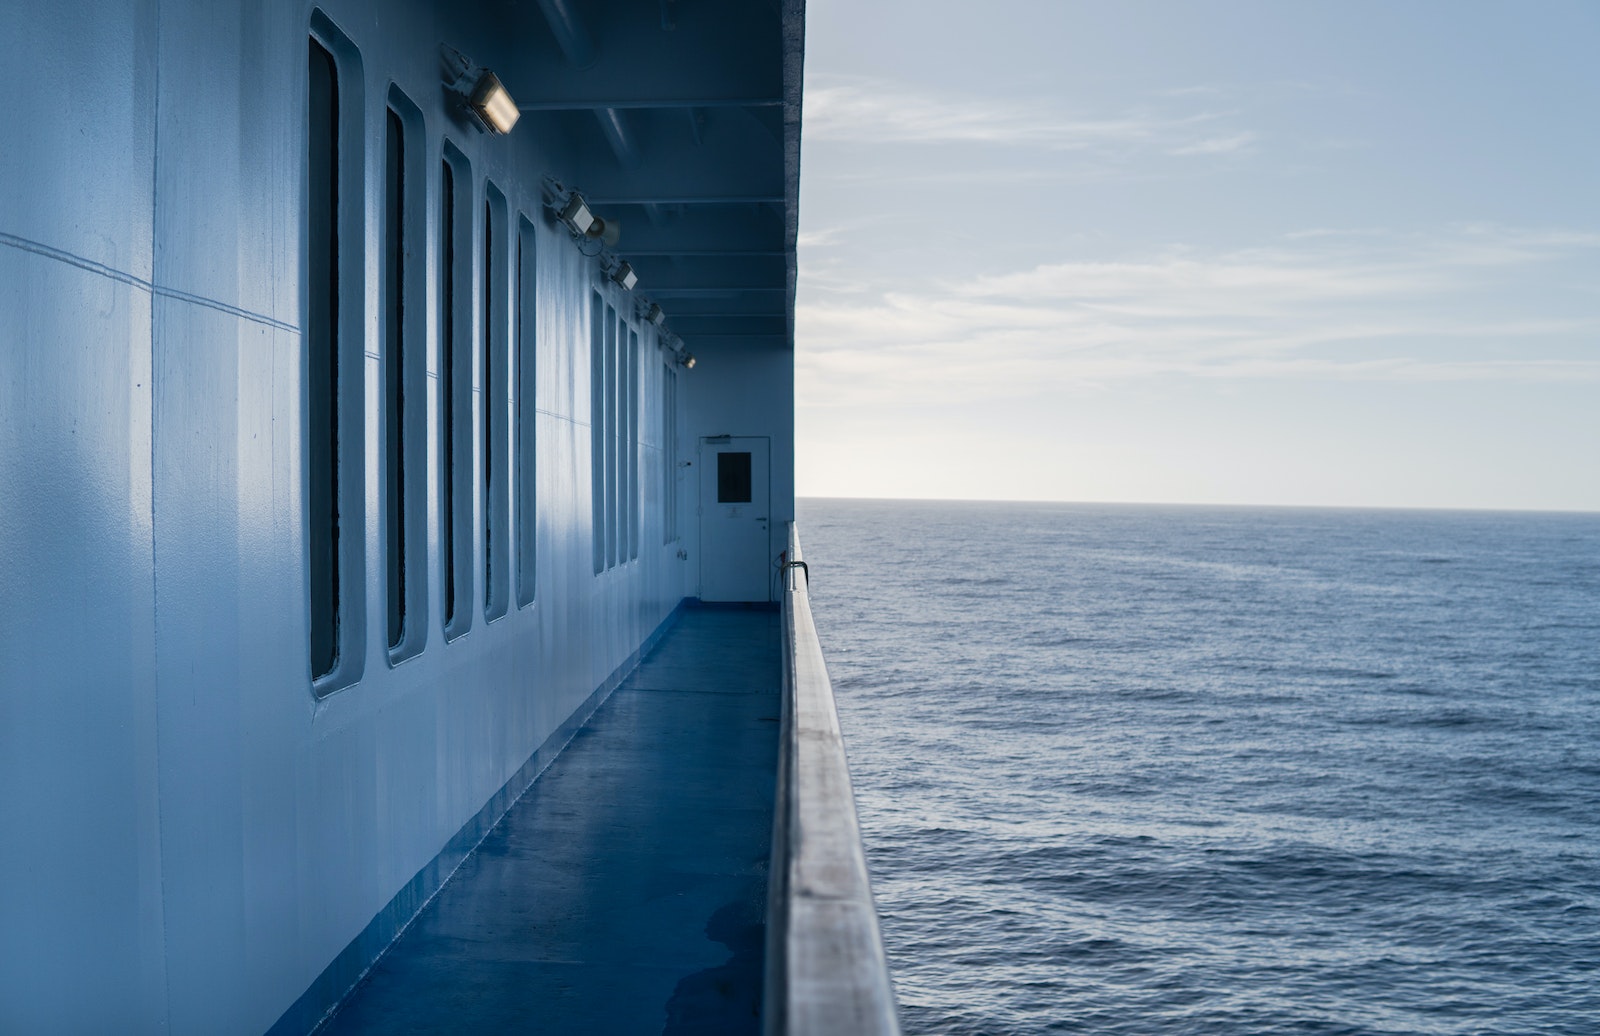 View of Sea From a Ferry Boat